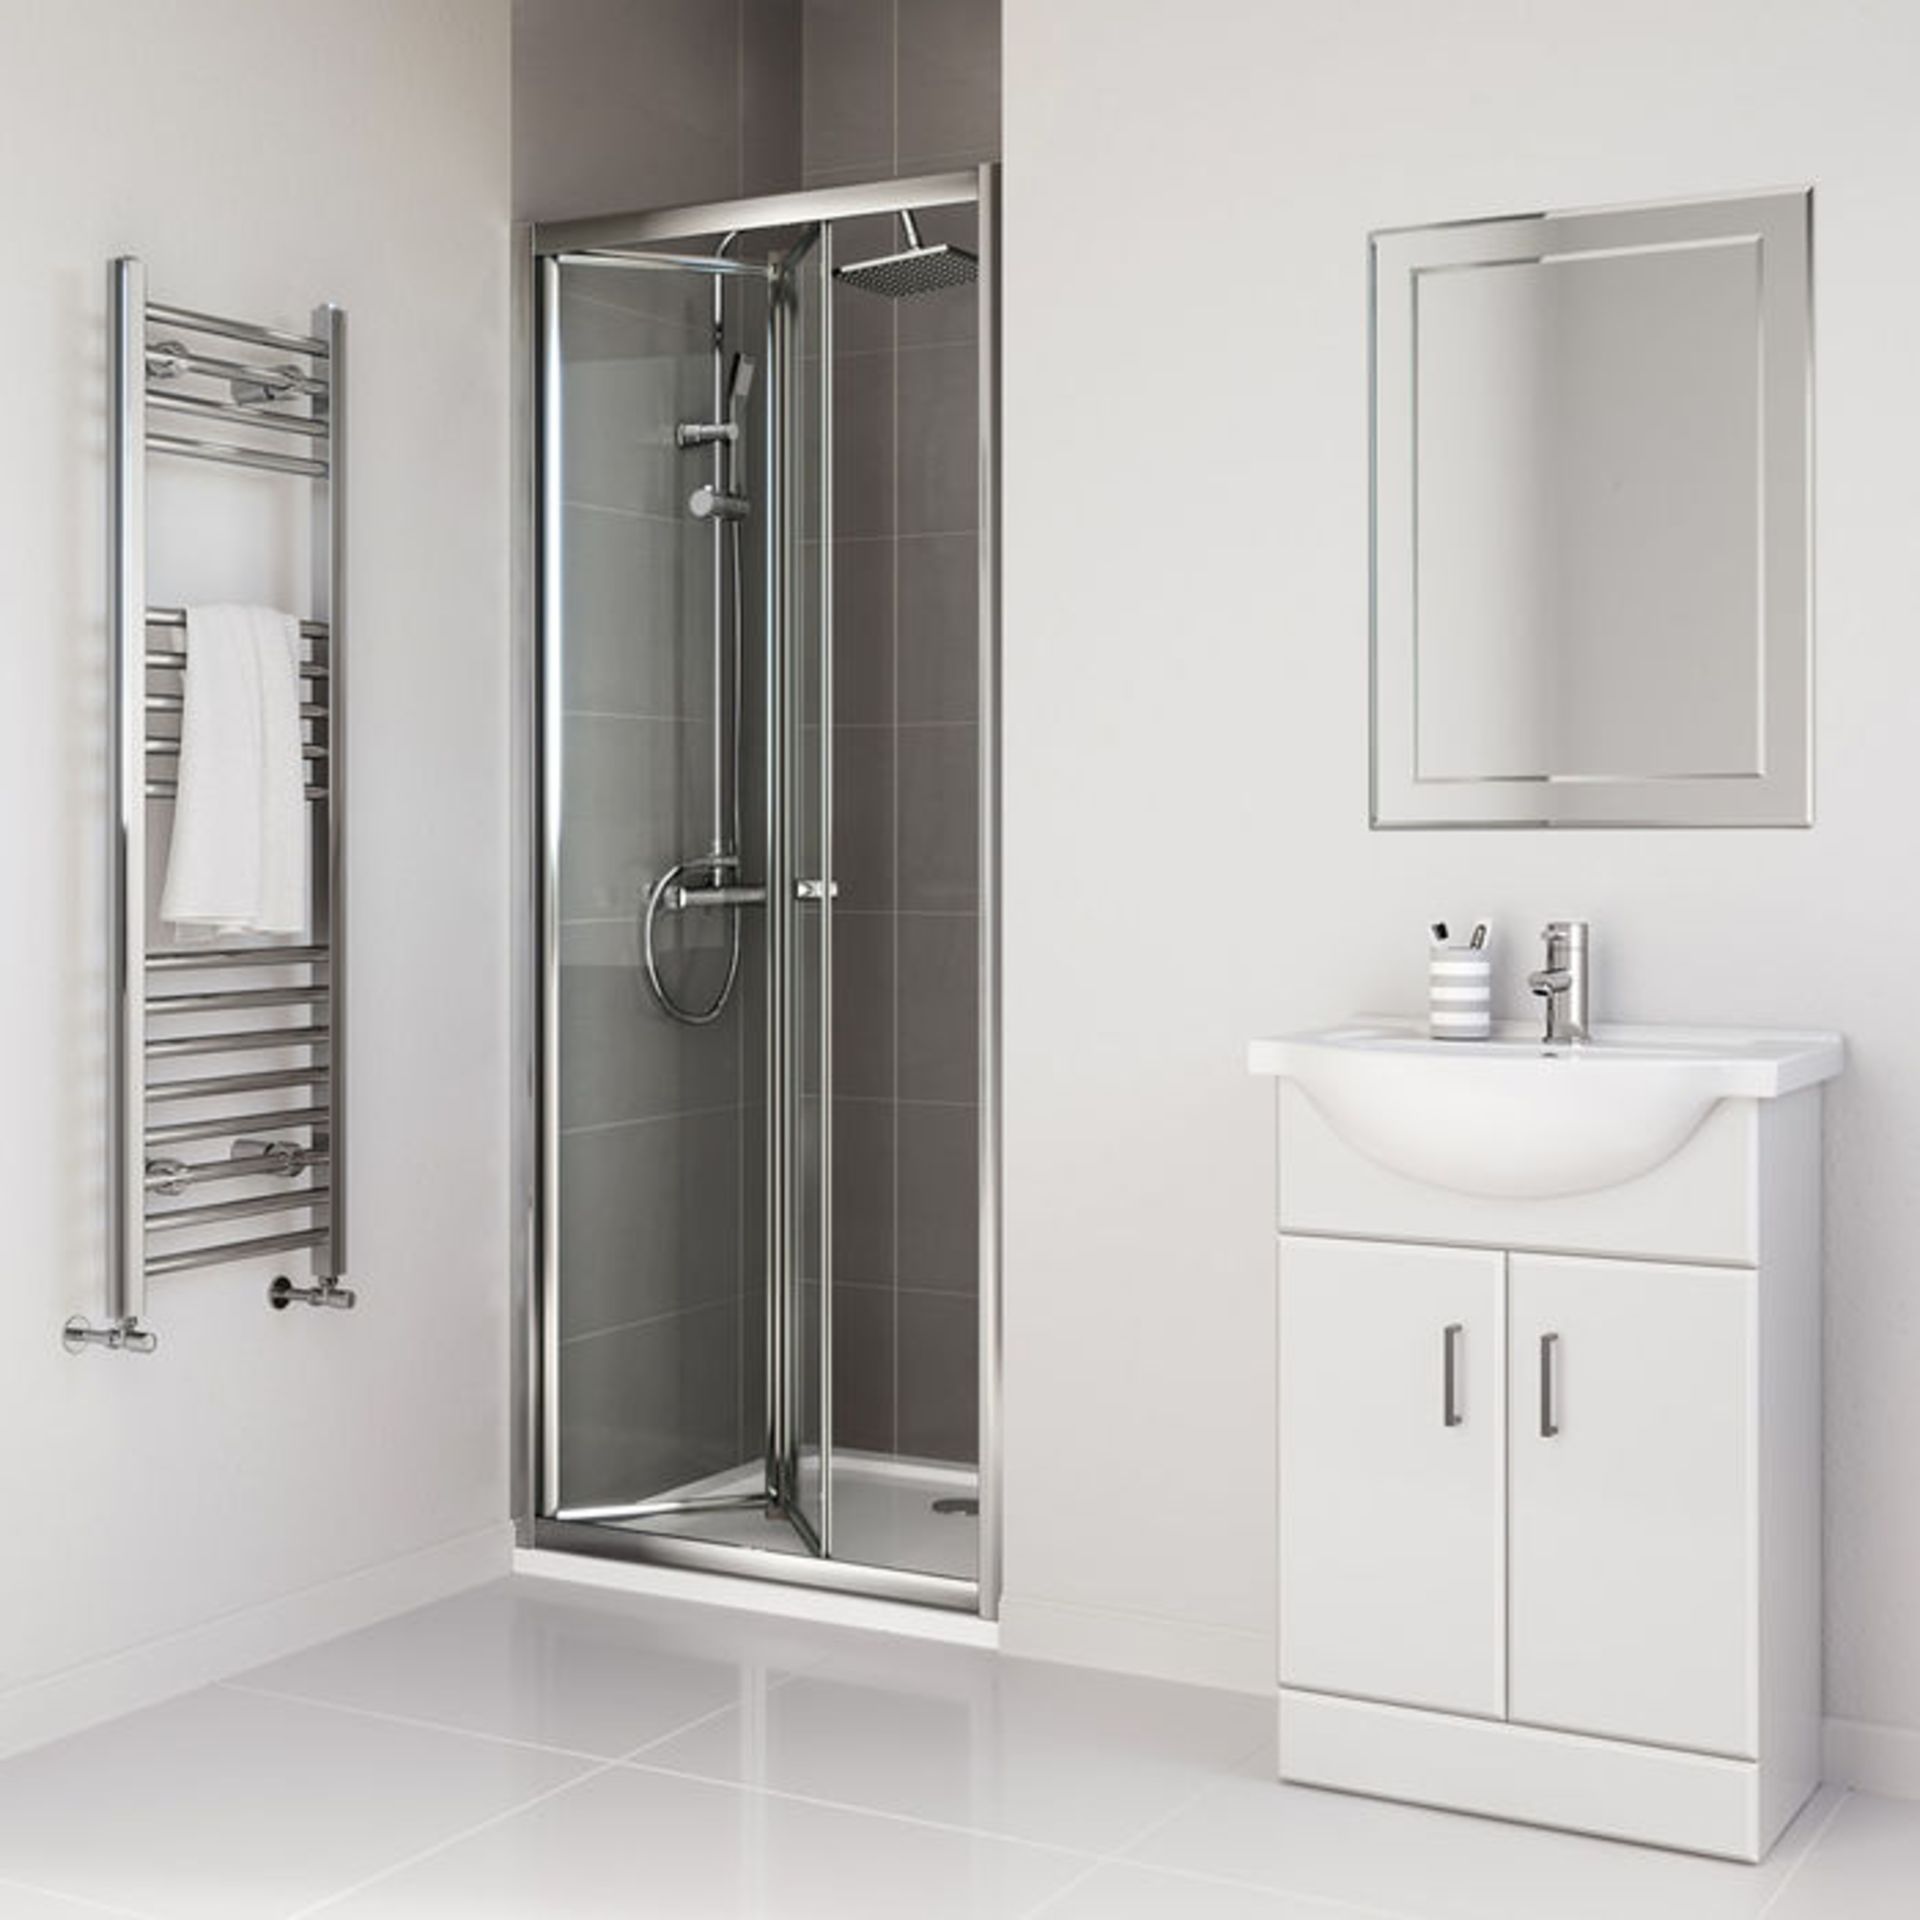 (PO13) 760mm - Elements Bi Fold Shower Door. RRP £299.99.4mm Safety GlassFully waterproof tested - Image 3 of 3